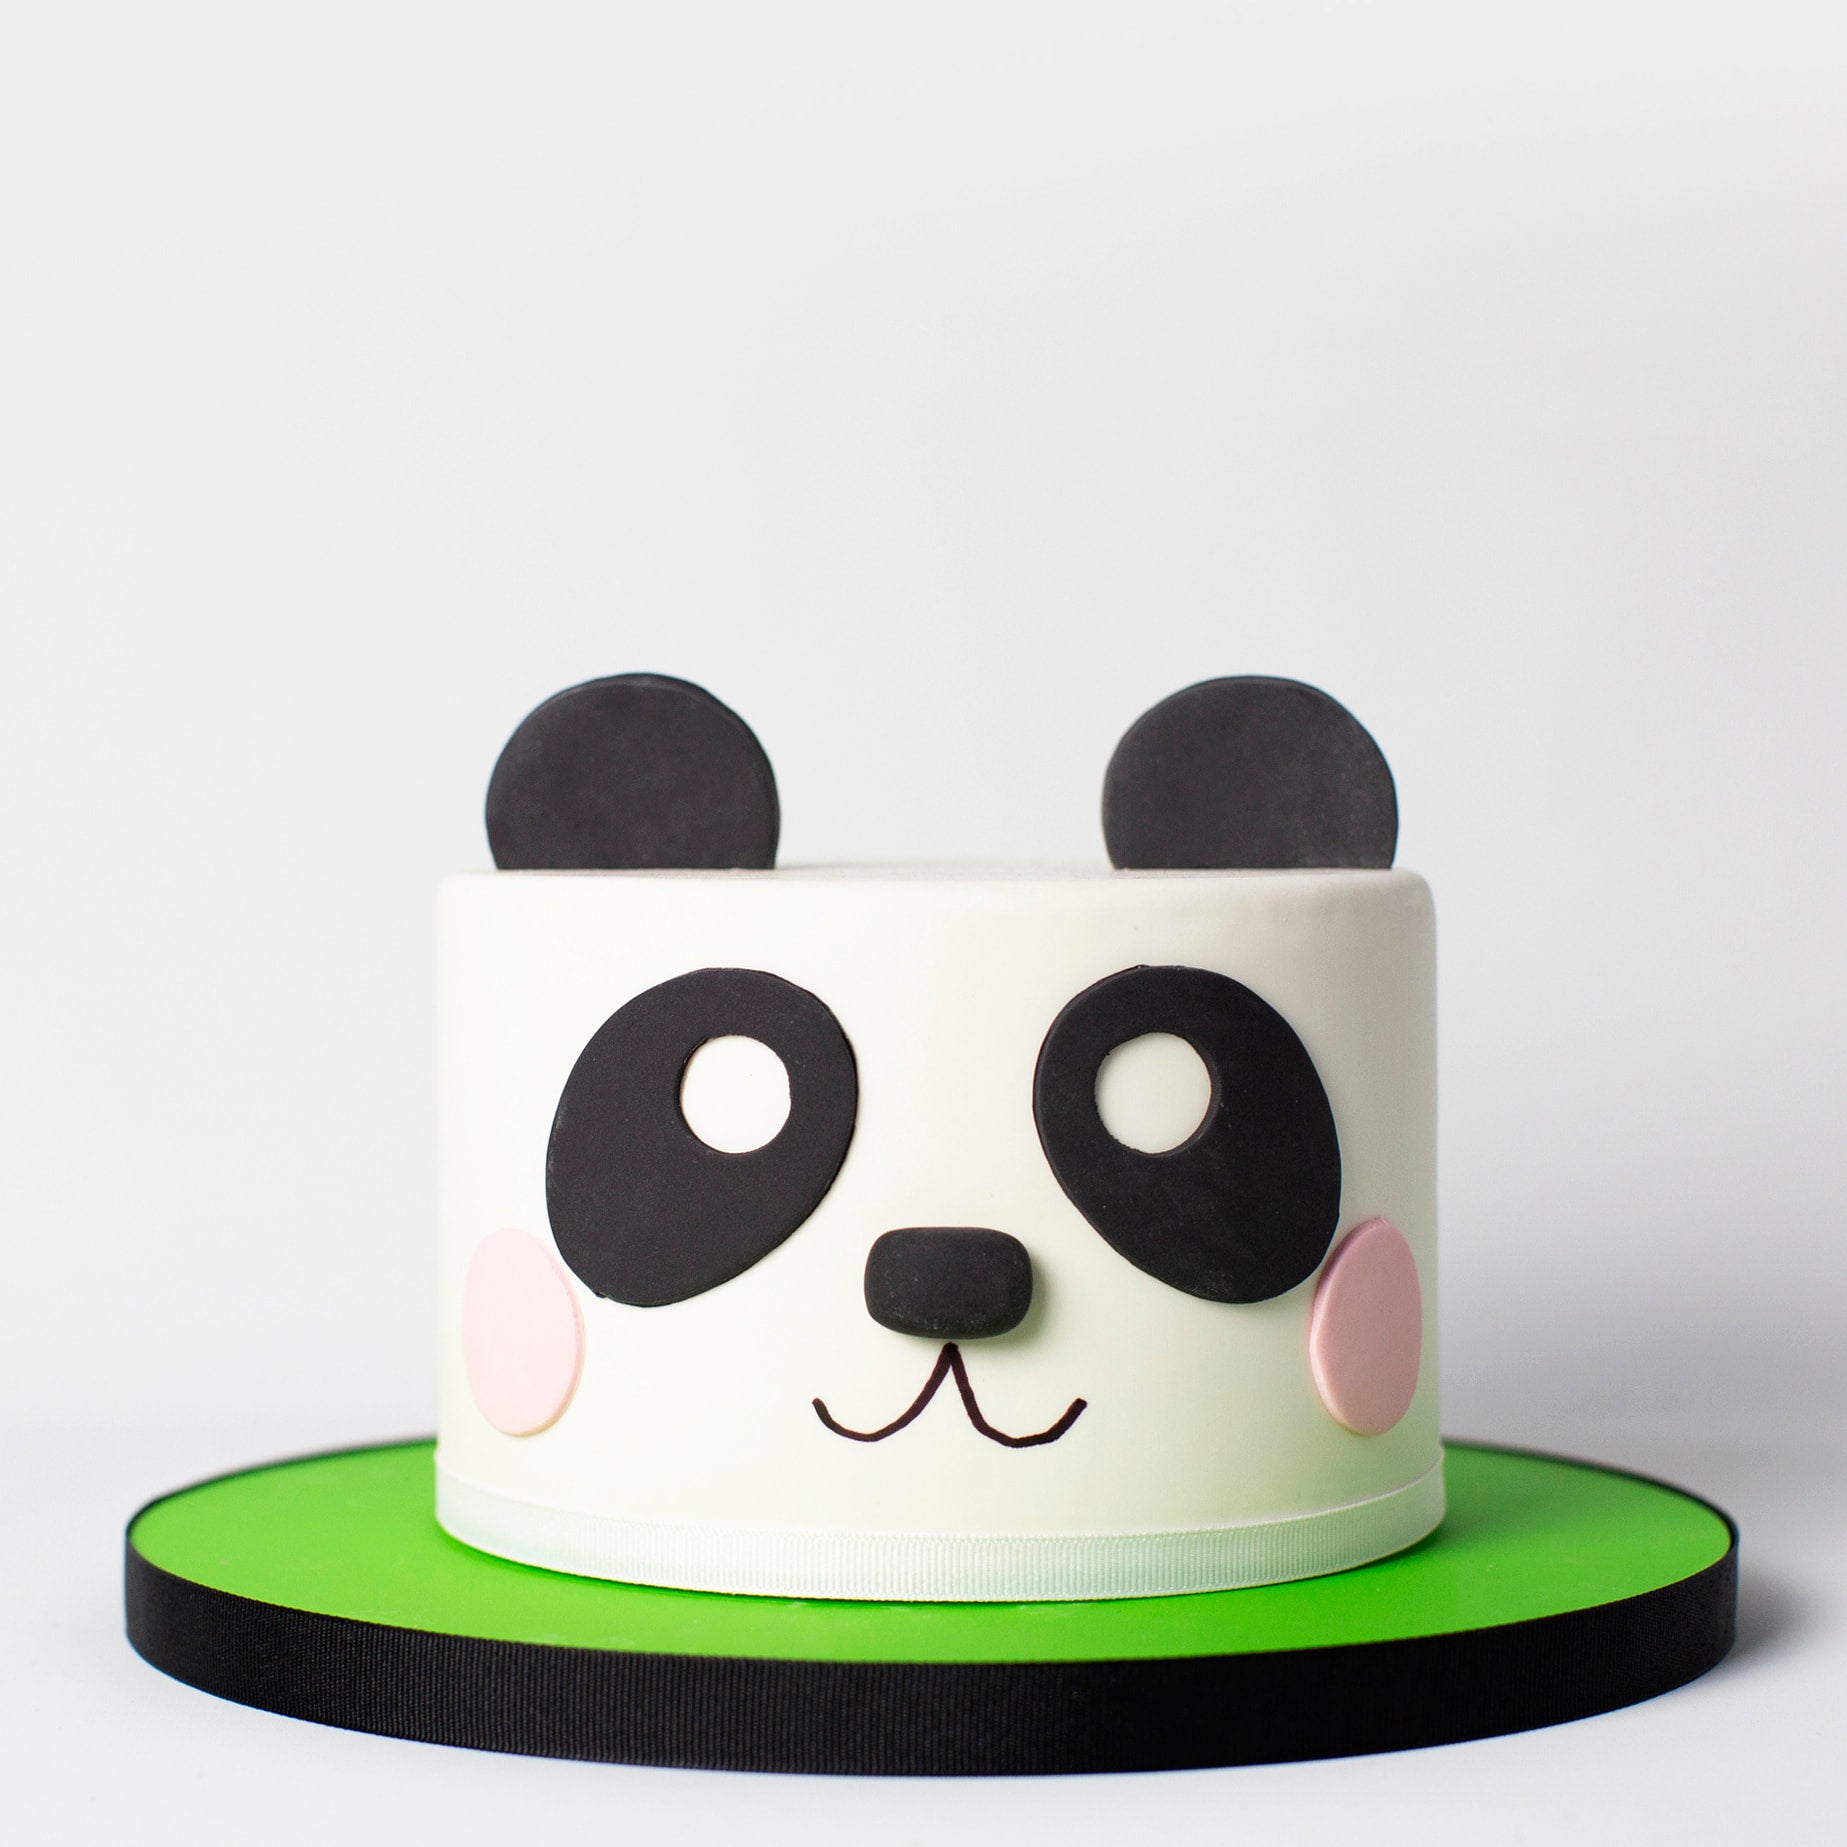 How To Make A Panda Cake - Soon To Be Charming